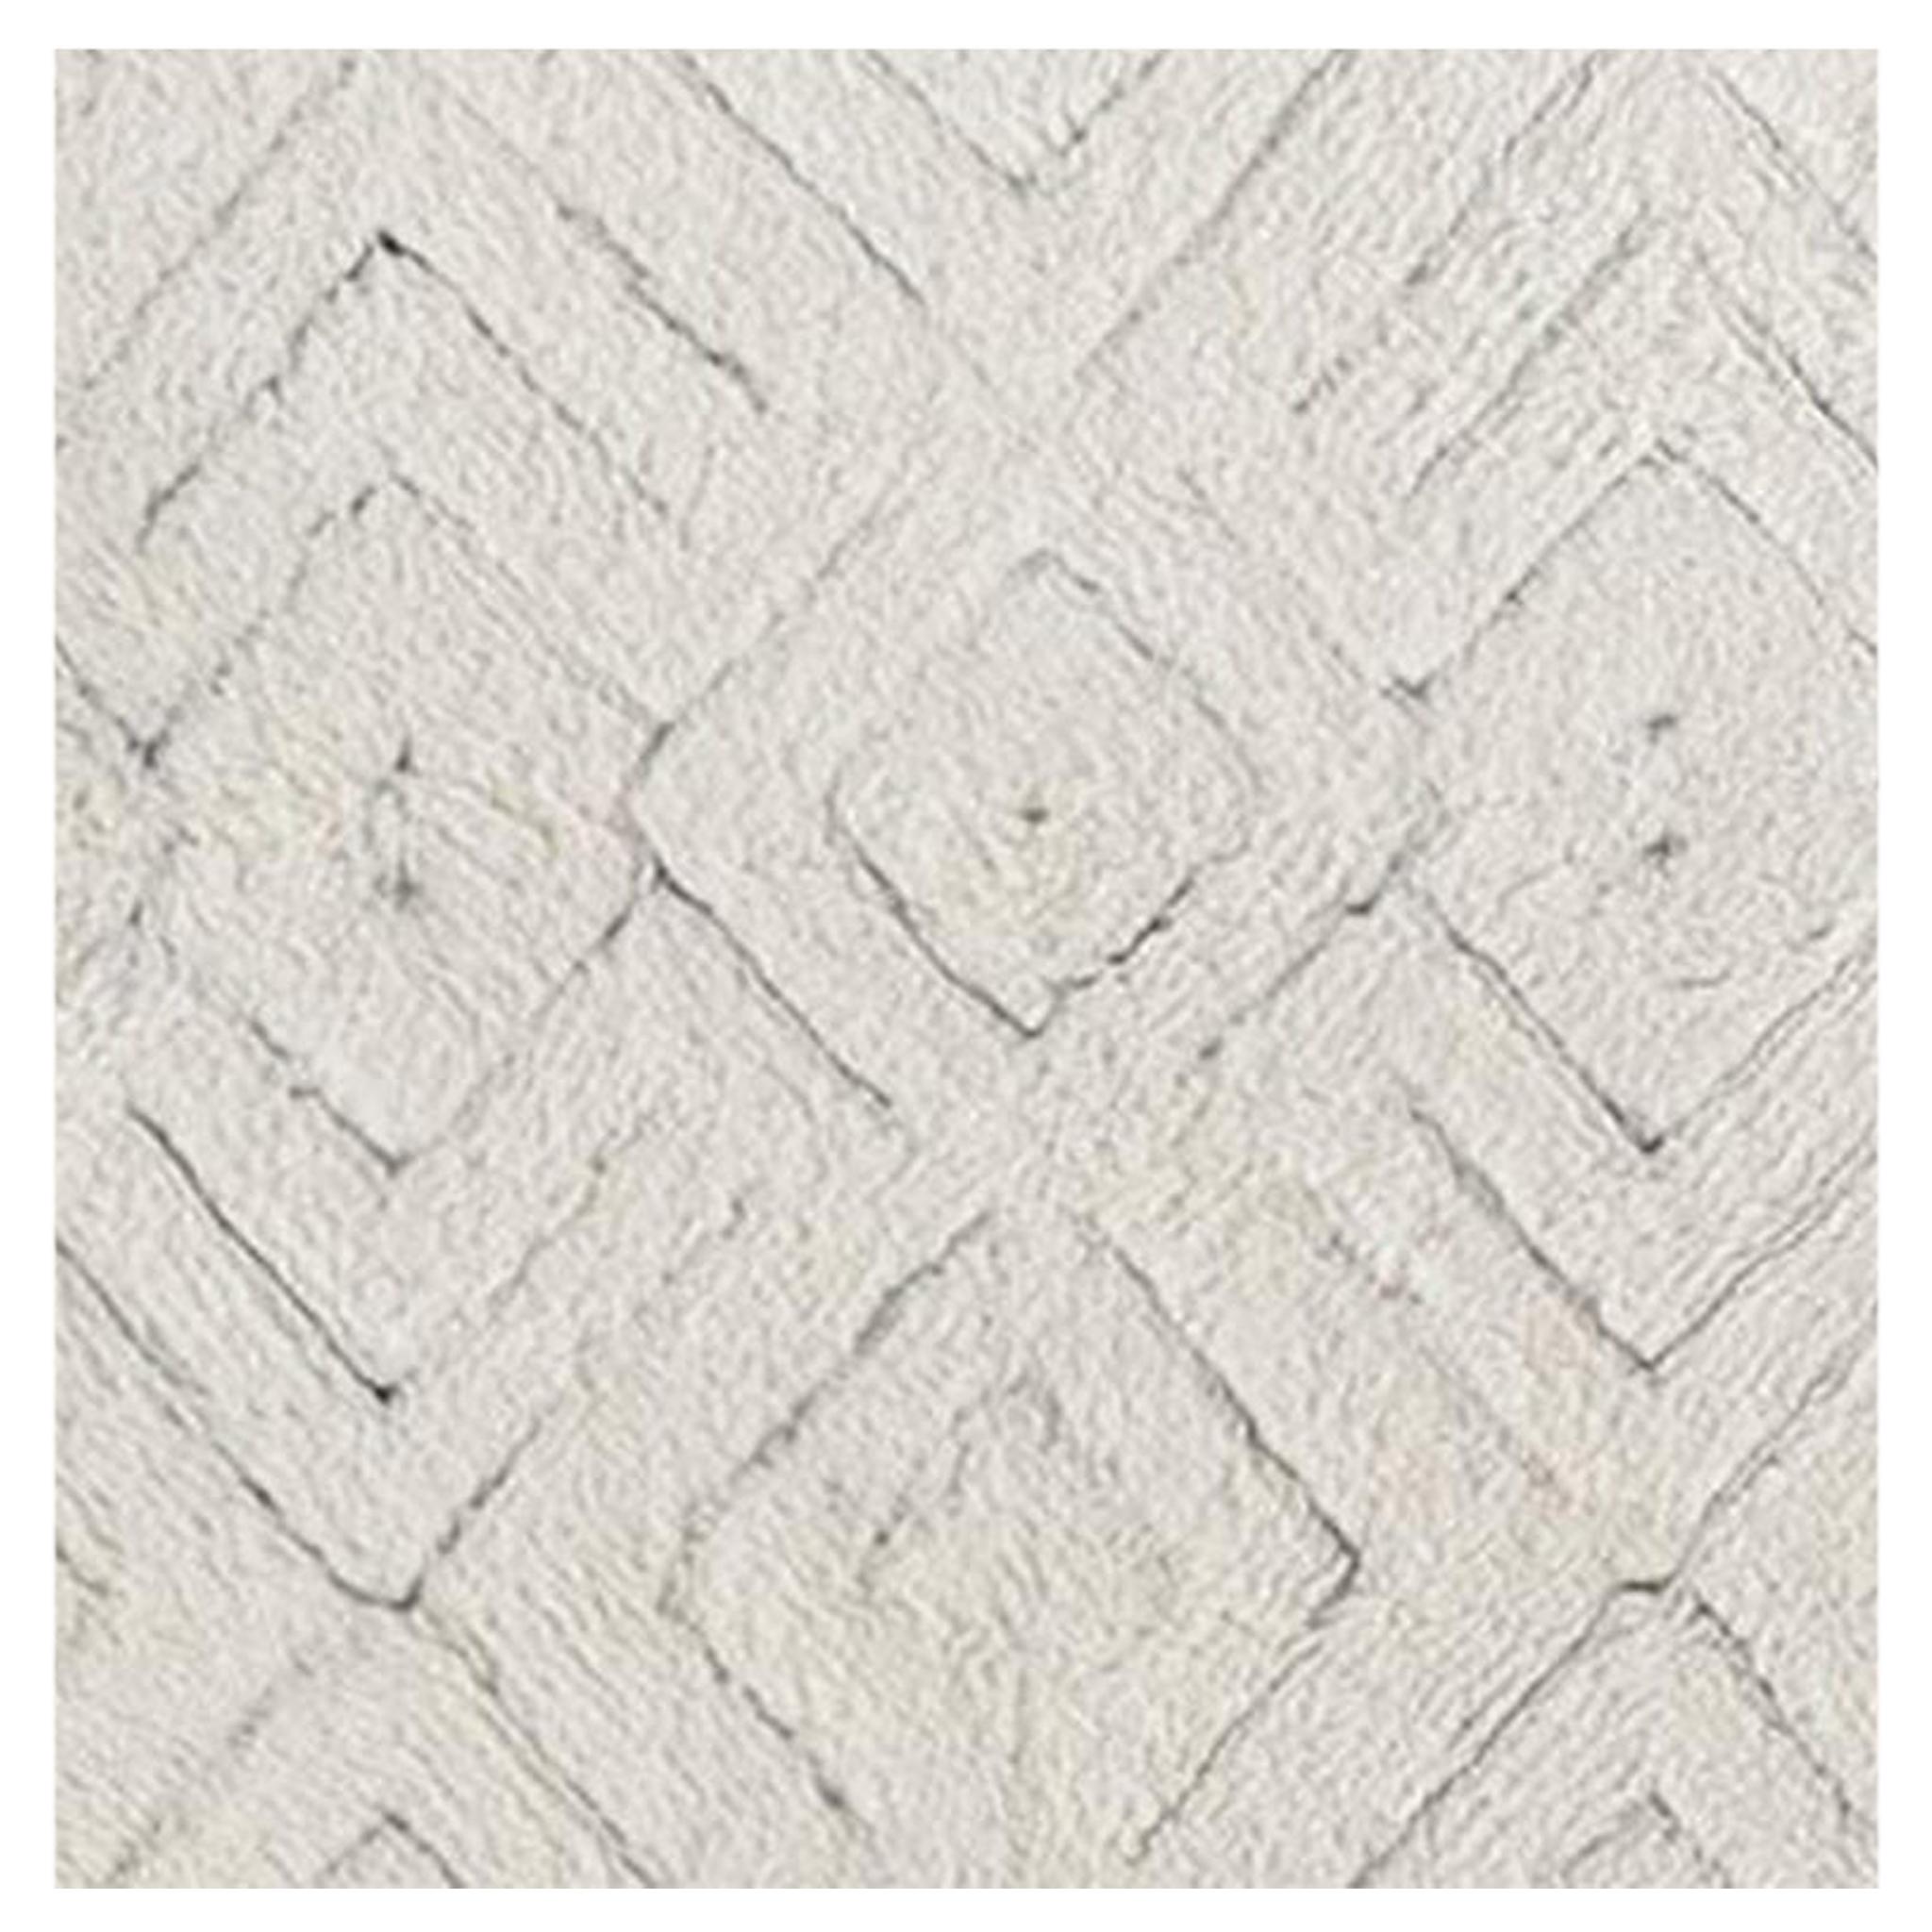 Swatch for Cava Rug in Natural by Ben Soleimani For Sale